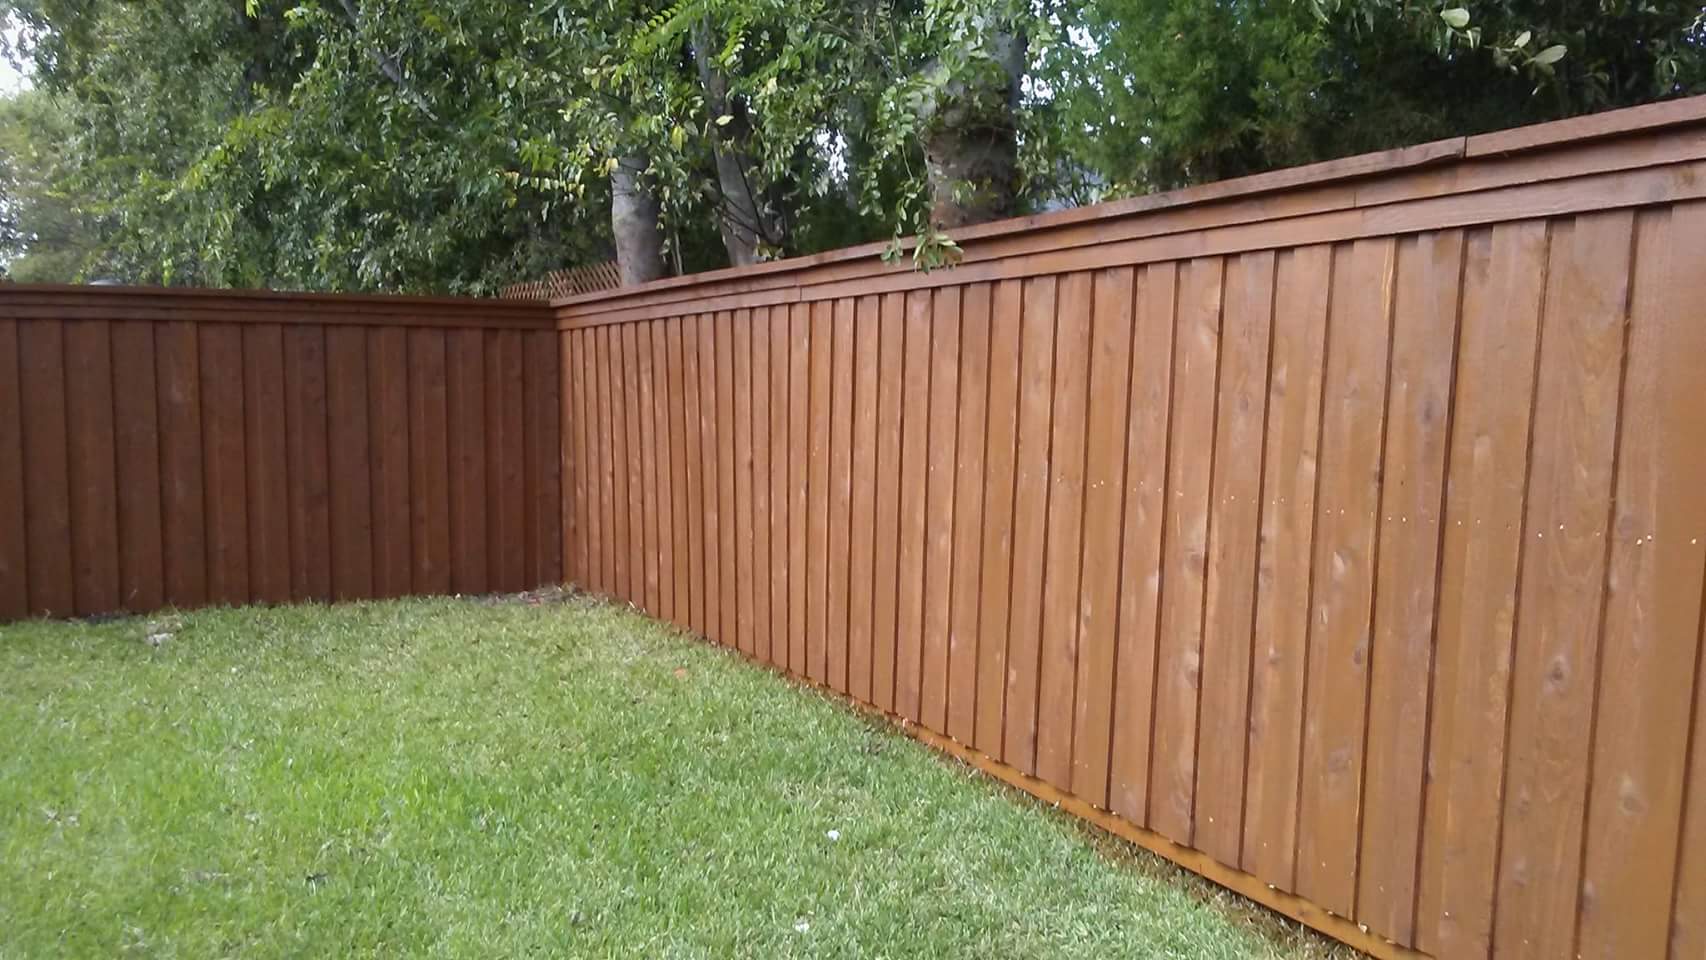  How To Preserve A Wooden Fence